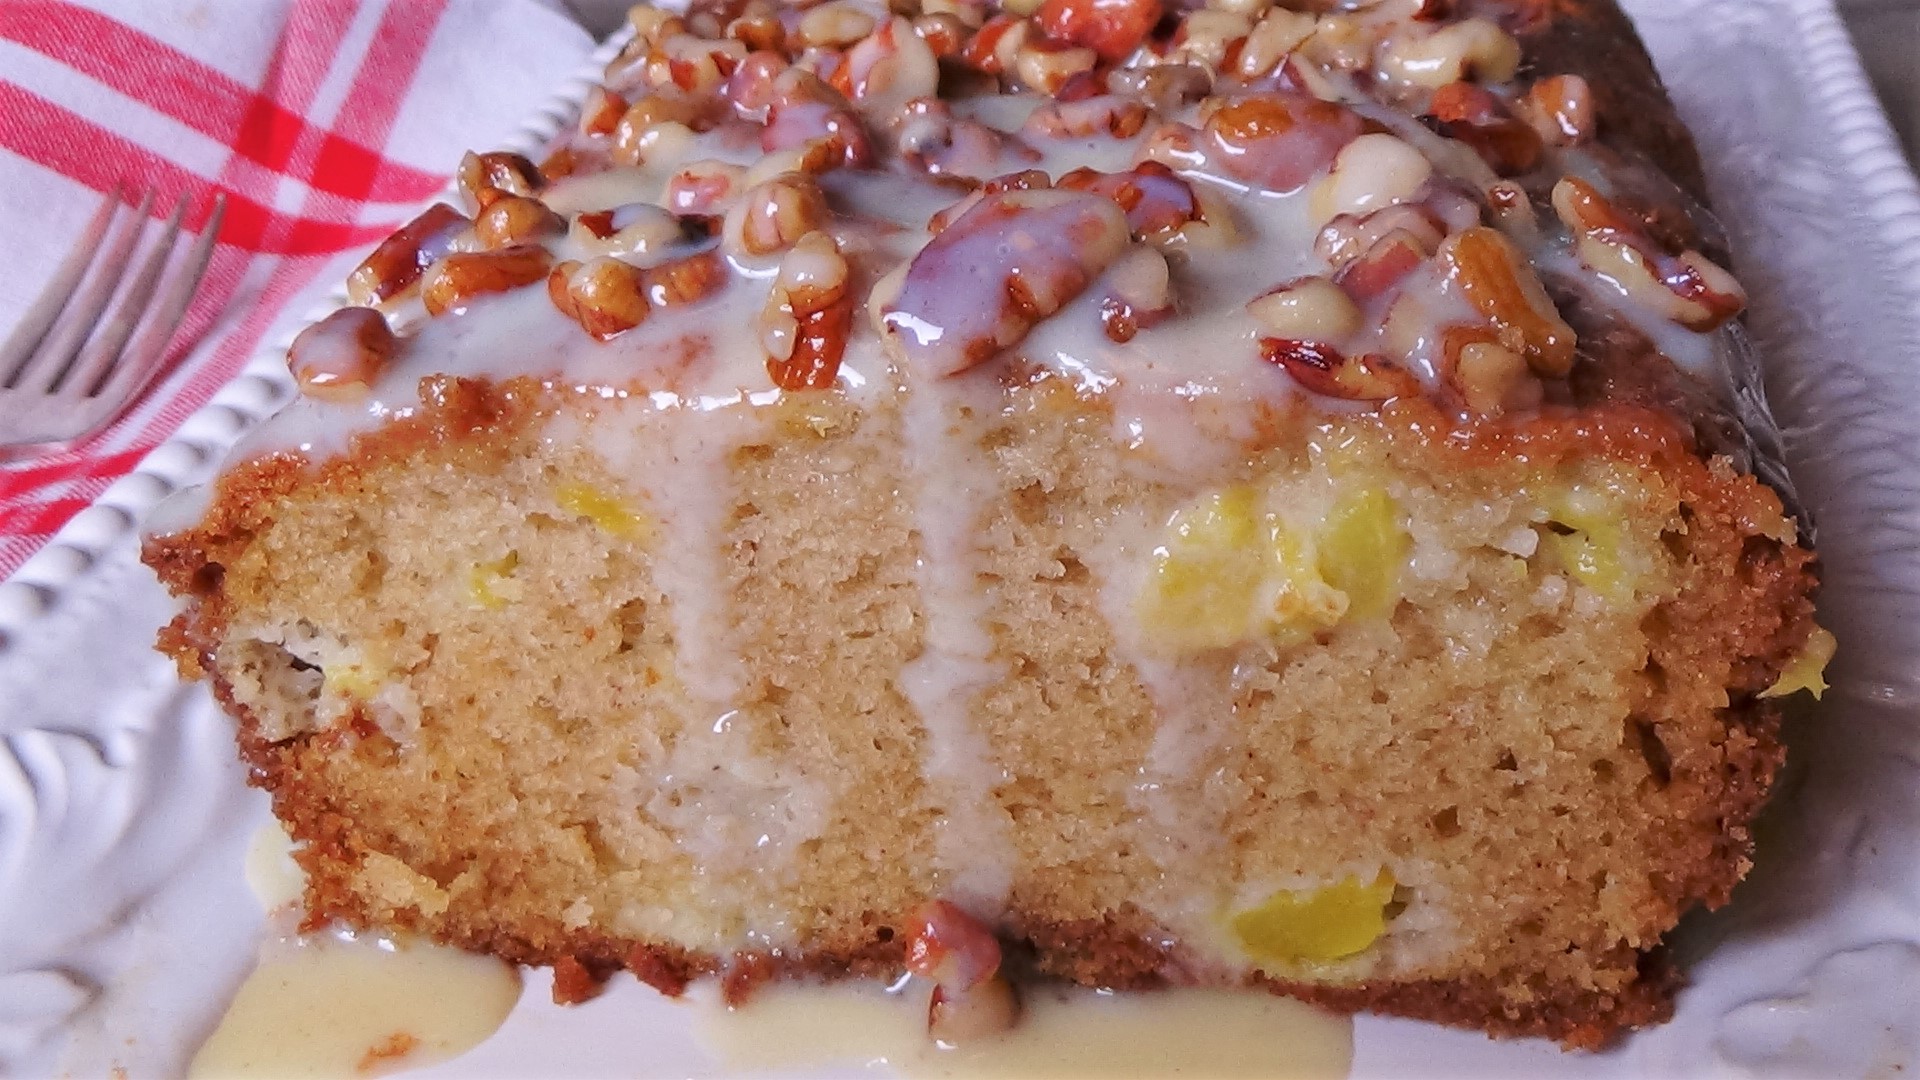 Fresh Peach Bread with Praline Topping